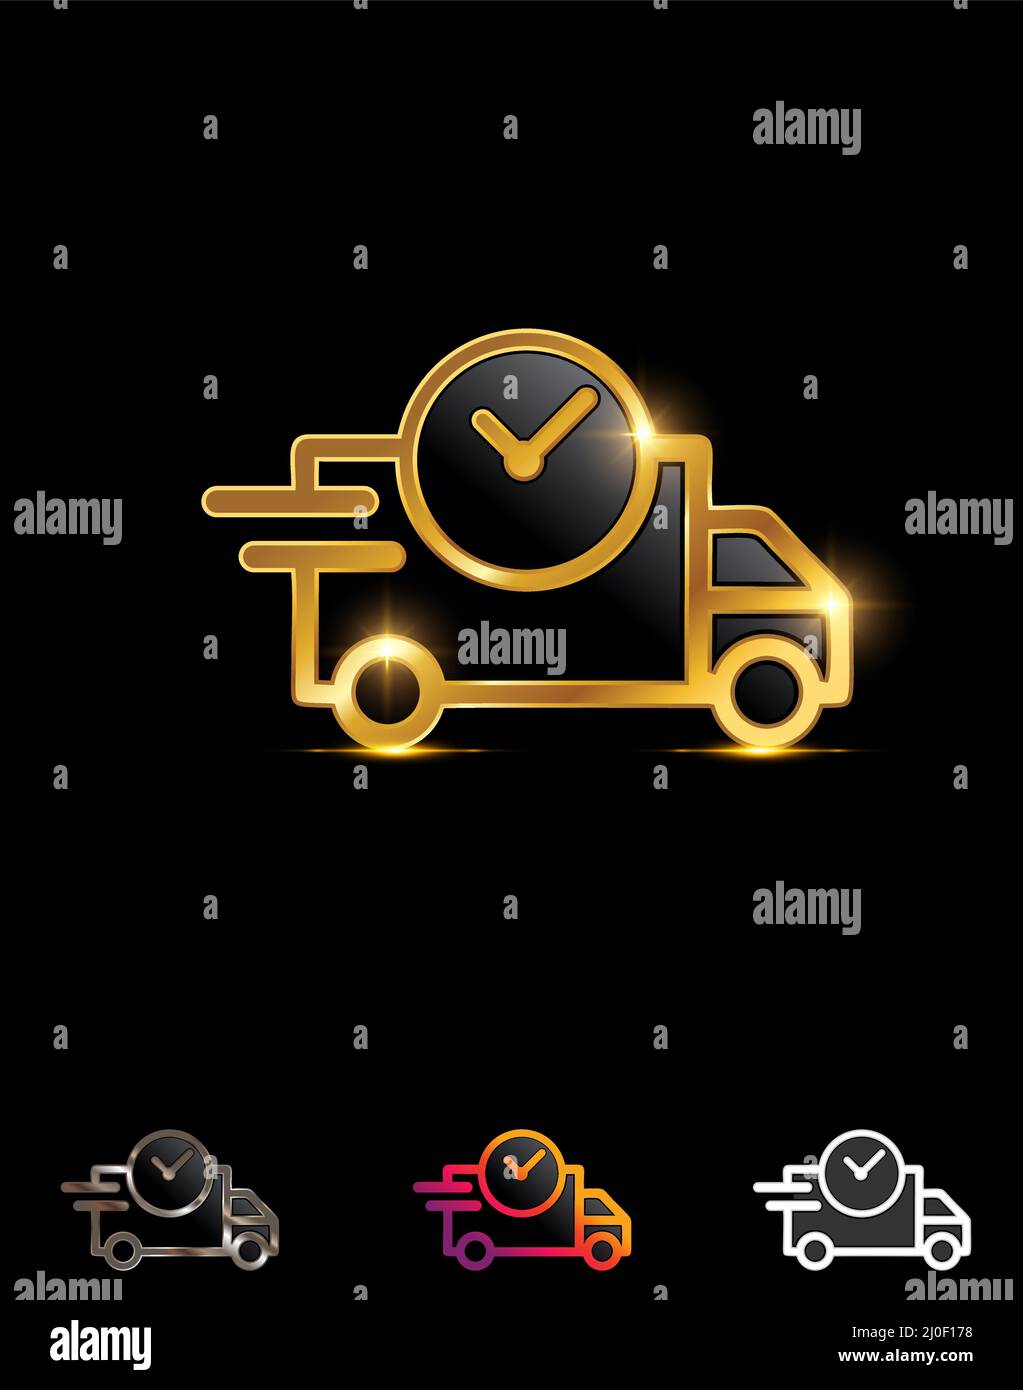 A Vector Illustration set of Golden On Time Delivery Vehicle Icon Stock Vector